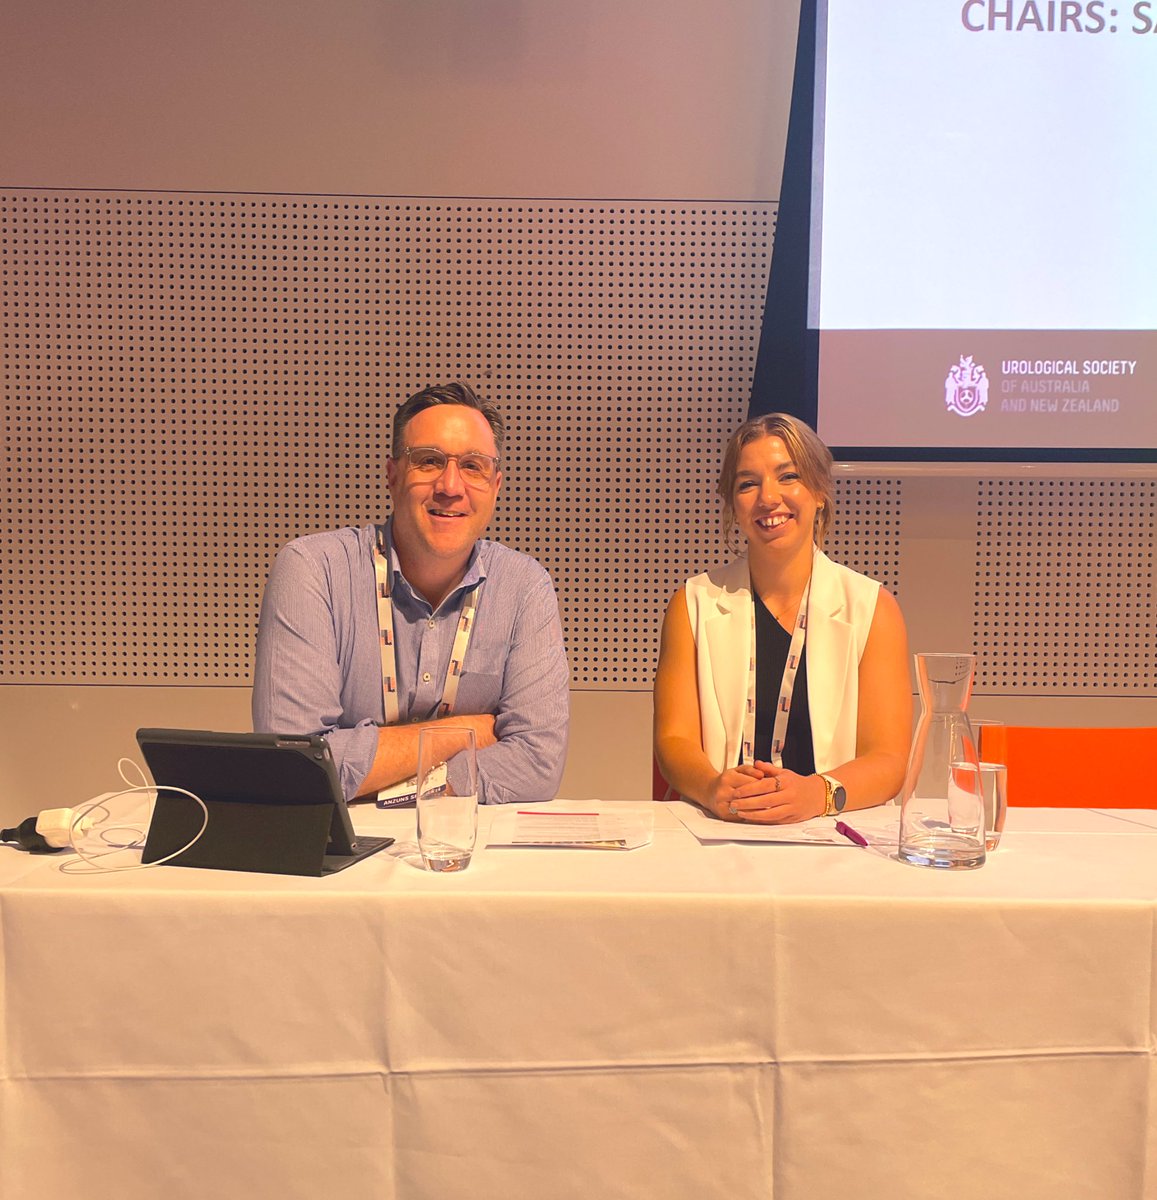 Thank you @Rusbr77 and @liz_medhurst for chairing the @ANZUNS_Urology Plenary Session 6 | fantastic discussions, great abstract presentations! #ANZUNS23 @PeterMacCC @PCFA